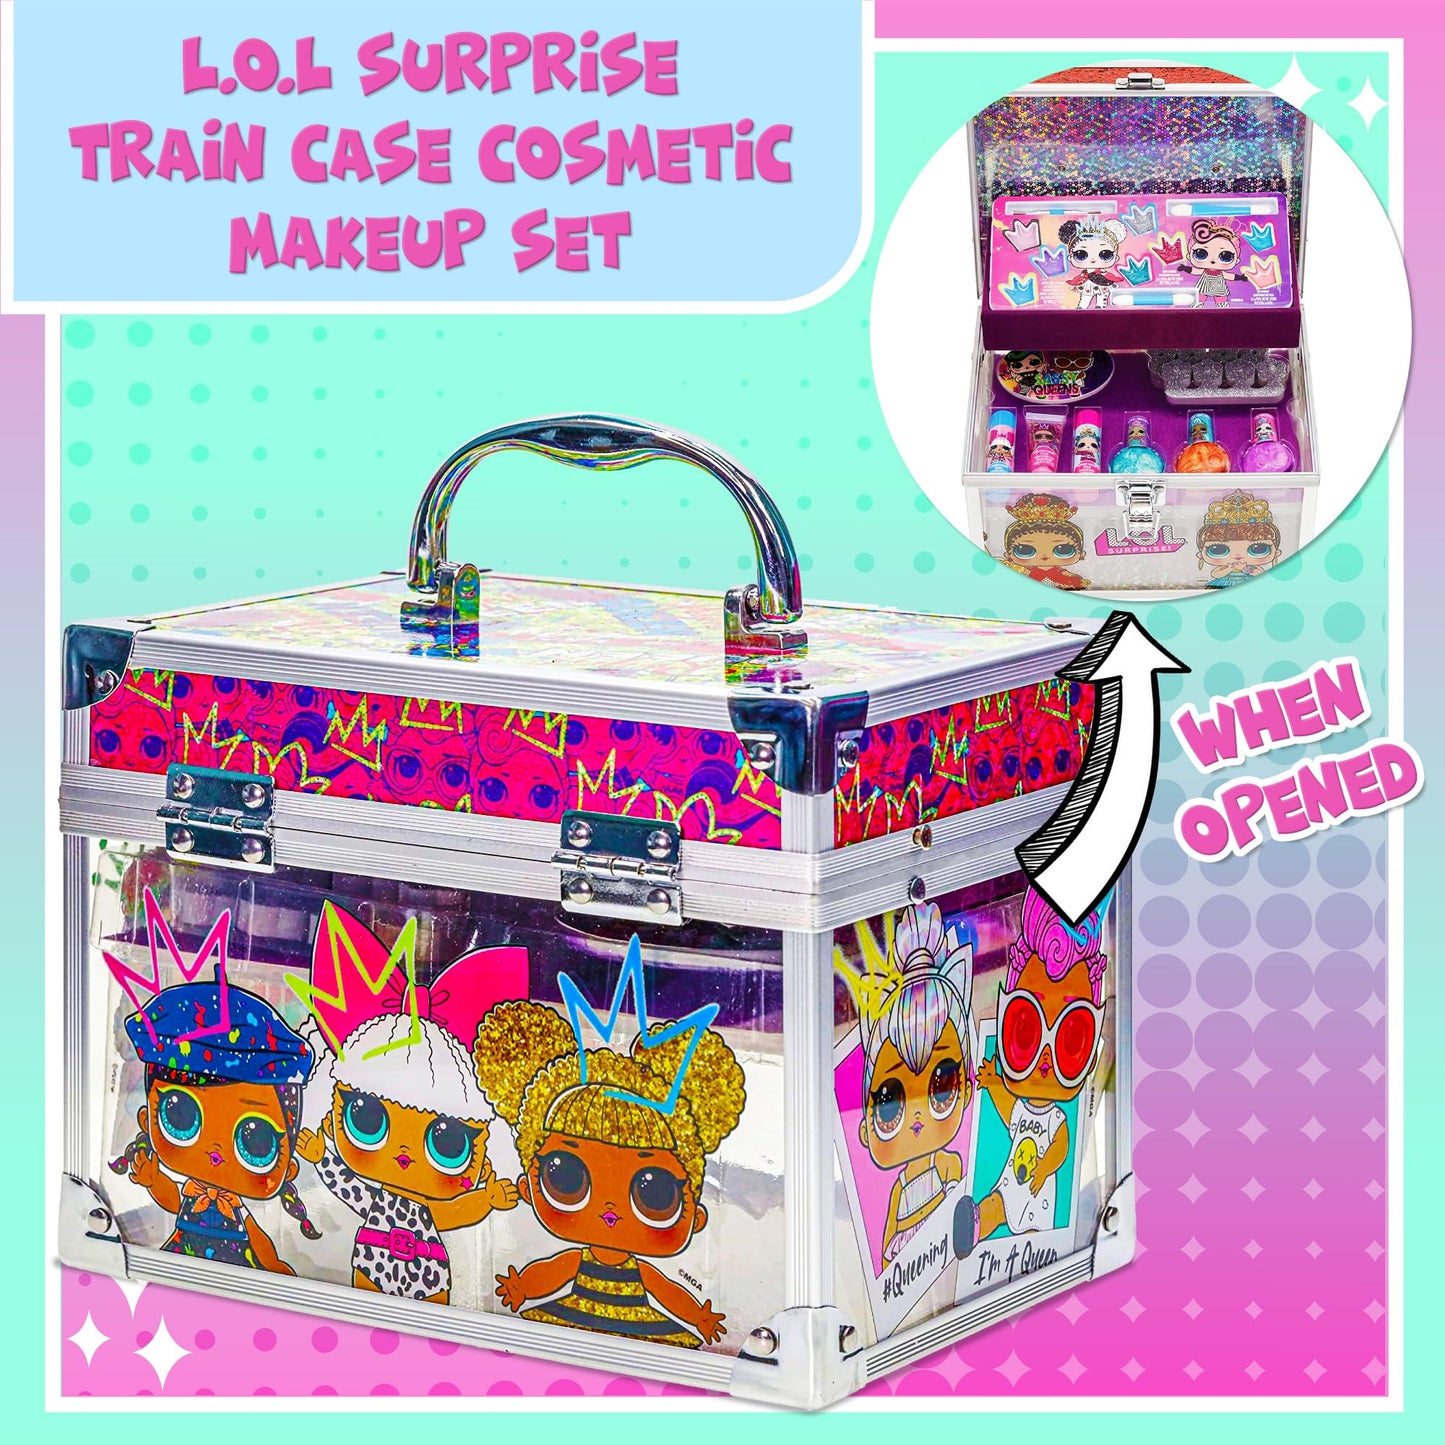 LOL Surprise Kids Makeup Kit for Girls, Real Washable Beauty Toy Makeup Set, Girls Beauty Gift, Play Makeup and Pretend Play Toys Ages 3 and Up, Townley Girl